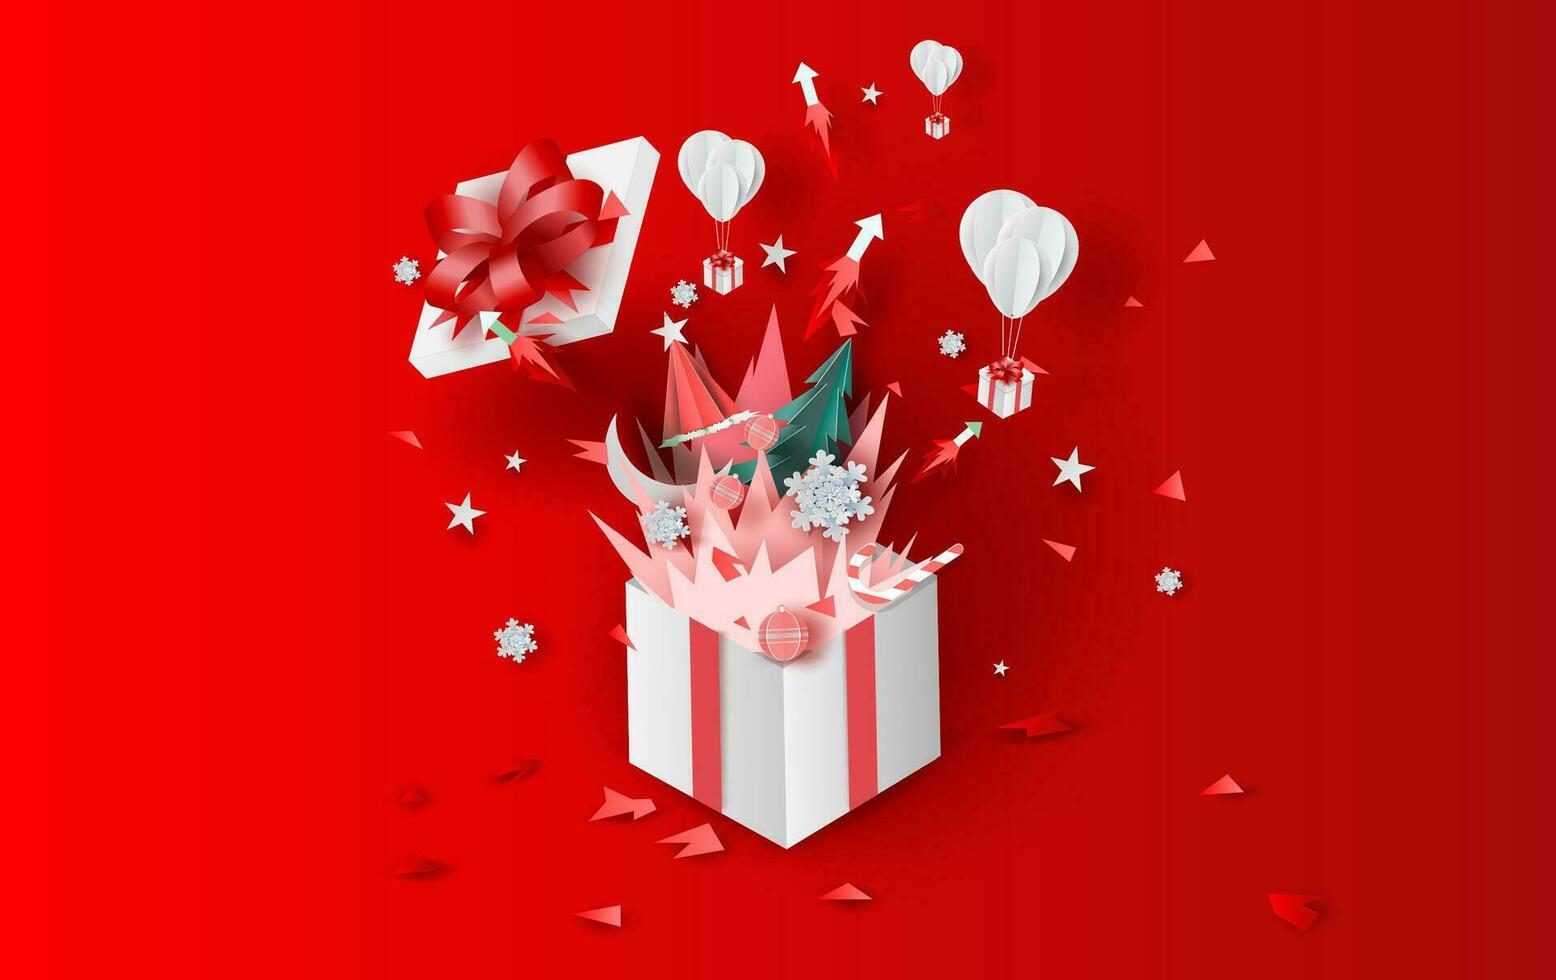 3D illustration of bonfire and fireworks art decorations in Christmas with gift box concept.Creative design paper cut and craft for festival party holiday winter season.graphic idea vacation vector. vector